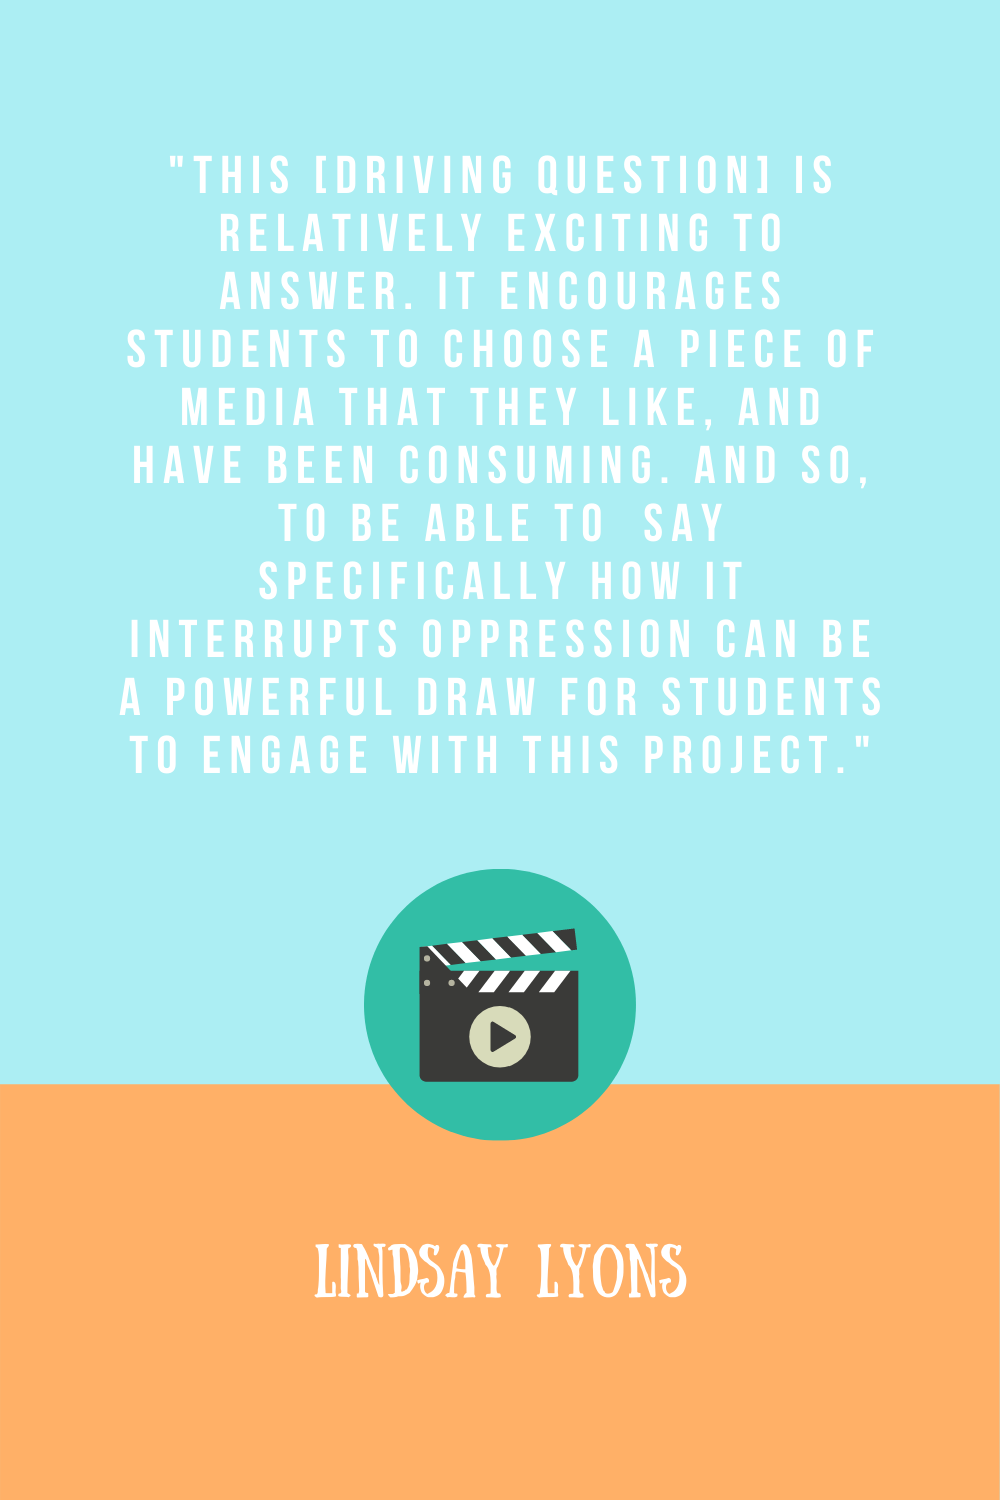 In this episode, I'm giving you a peek into my famous Media Critique Project! I talk about the inspiration for it, the framework, driving questions, and the creativity that students have approached this with. Make sure you grab the Project breakdown document so that you can share this with your own students. They're going to love it!